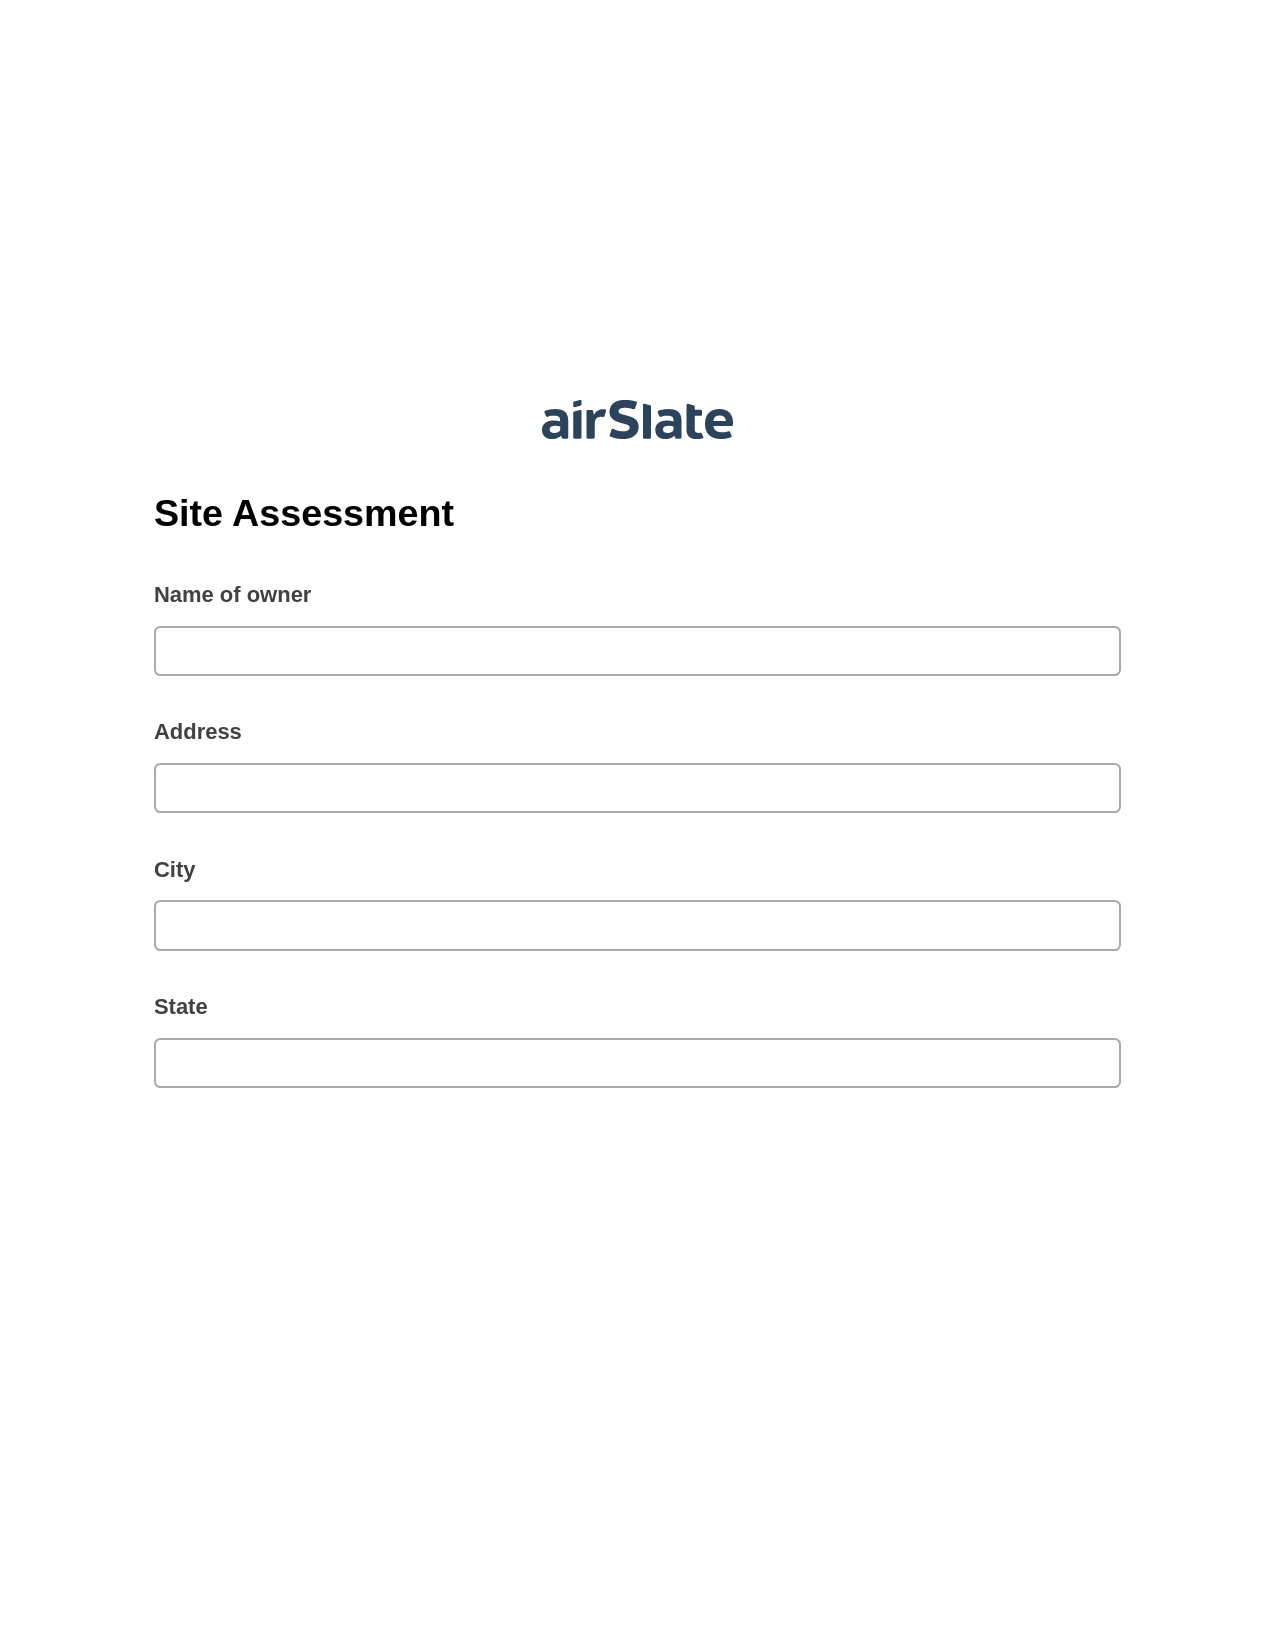 Multirole Site Assessment Pre-fill from NetSuite Records Bot, Create Slate Reminder Bot, Export to Excel 365 Bot